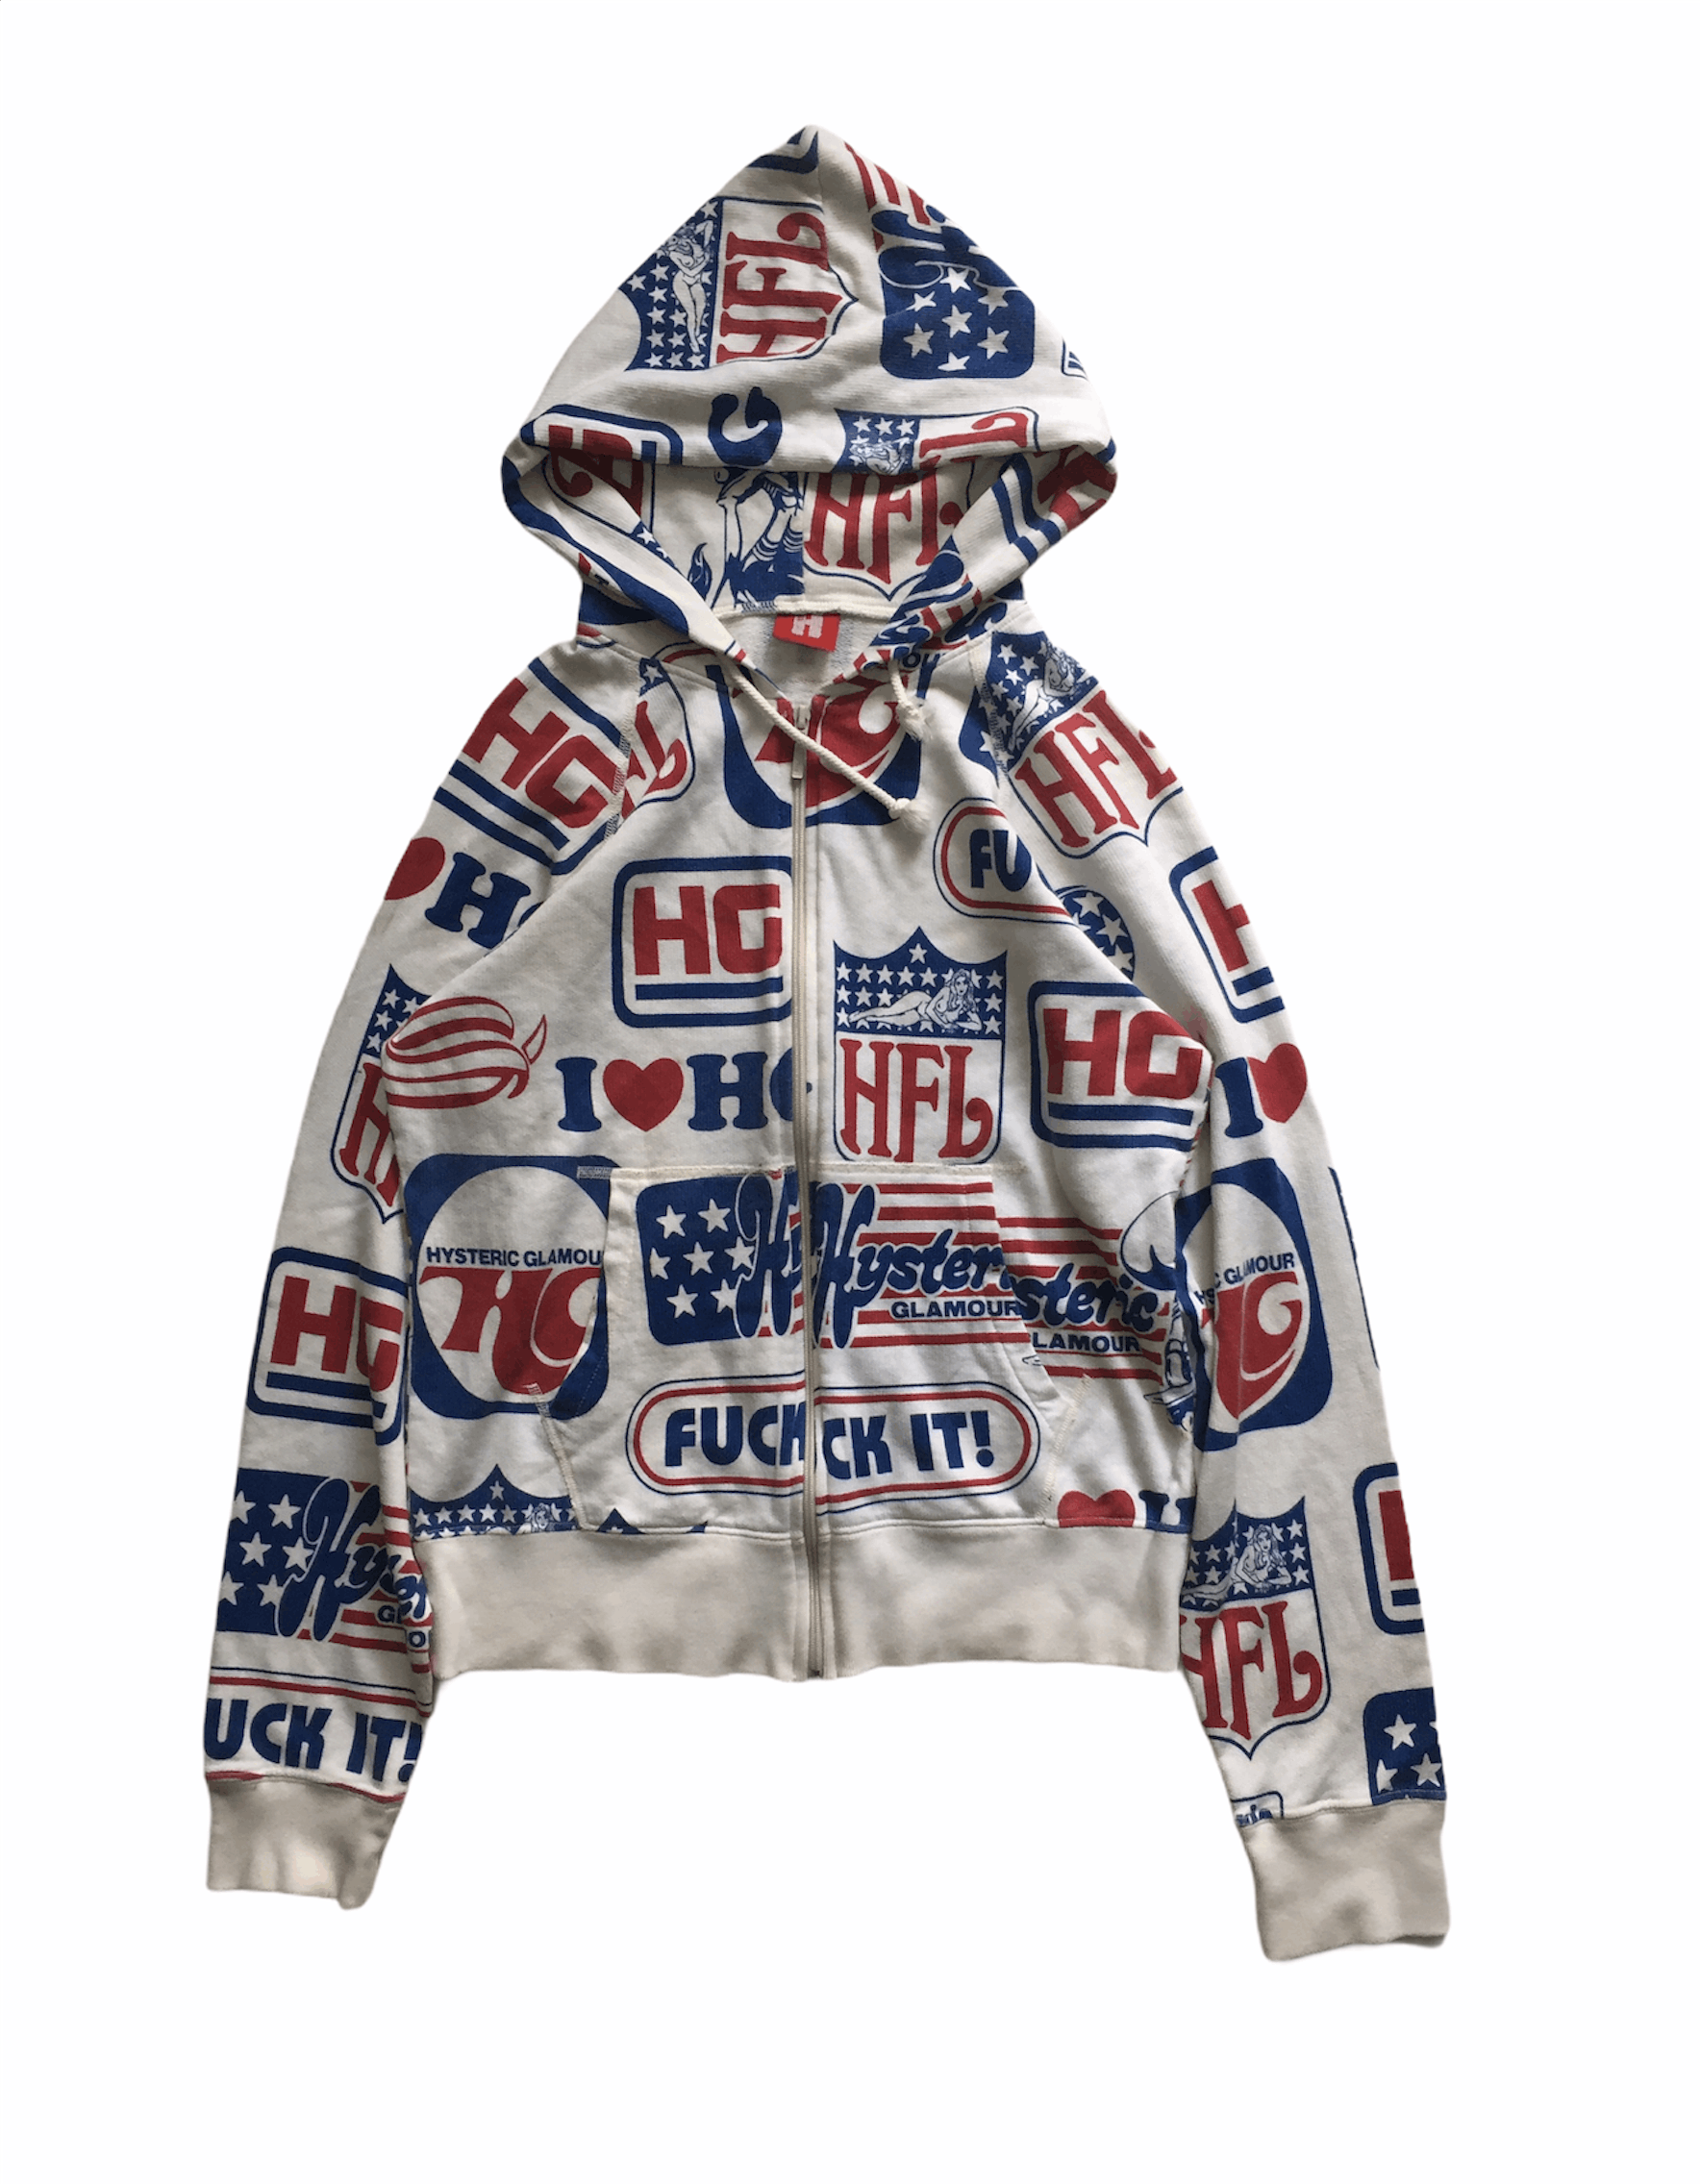 Hysteric Glamour 90's Hysteric Fuck IT multilogo hoodie | Grailed